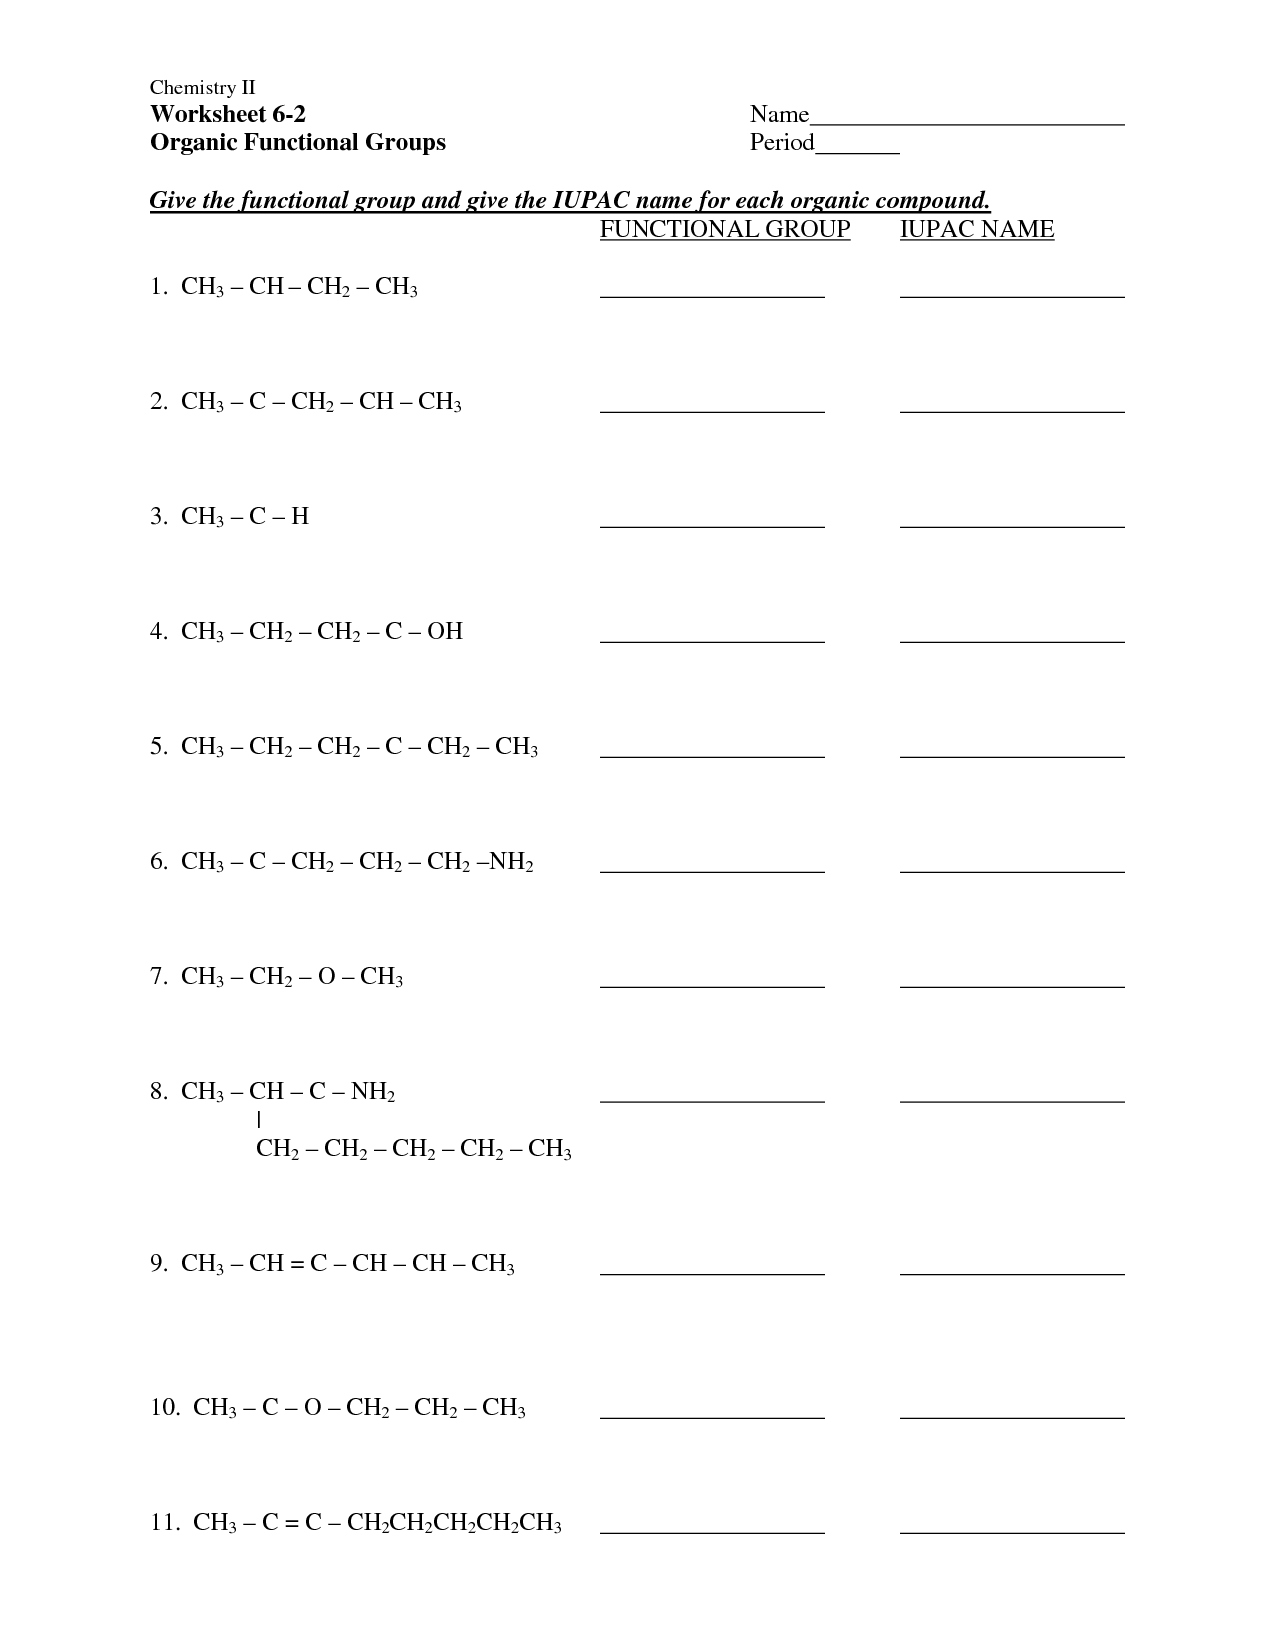 14-best-images-of-organic-chemistry-worksheets-chemistry-organic-compounds-worksheets-organic